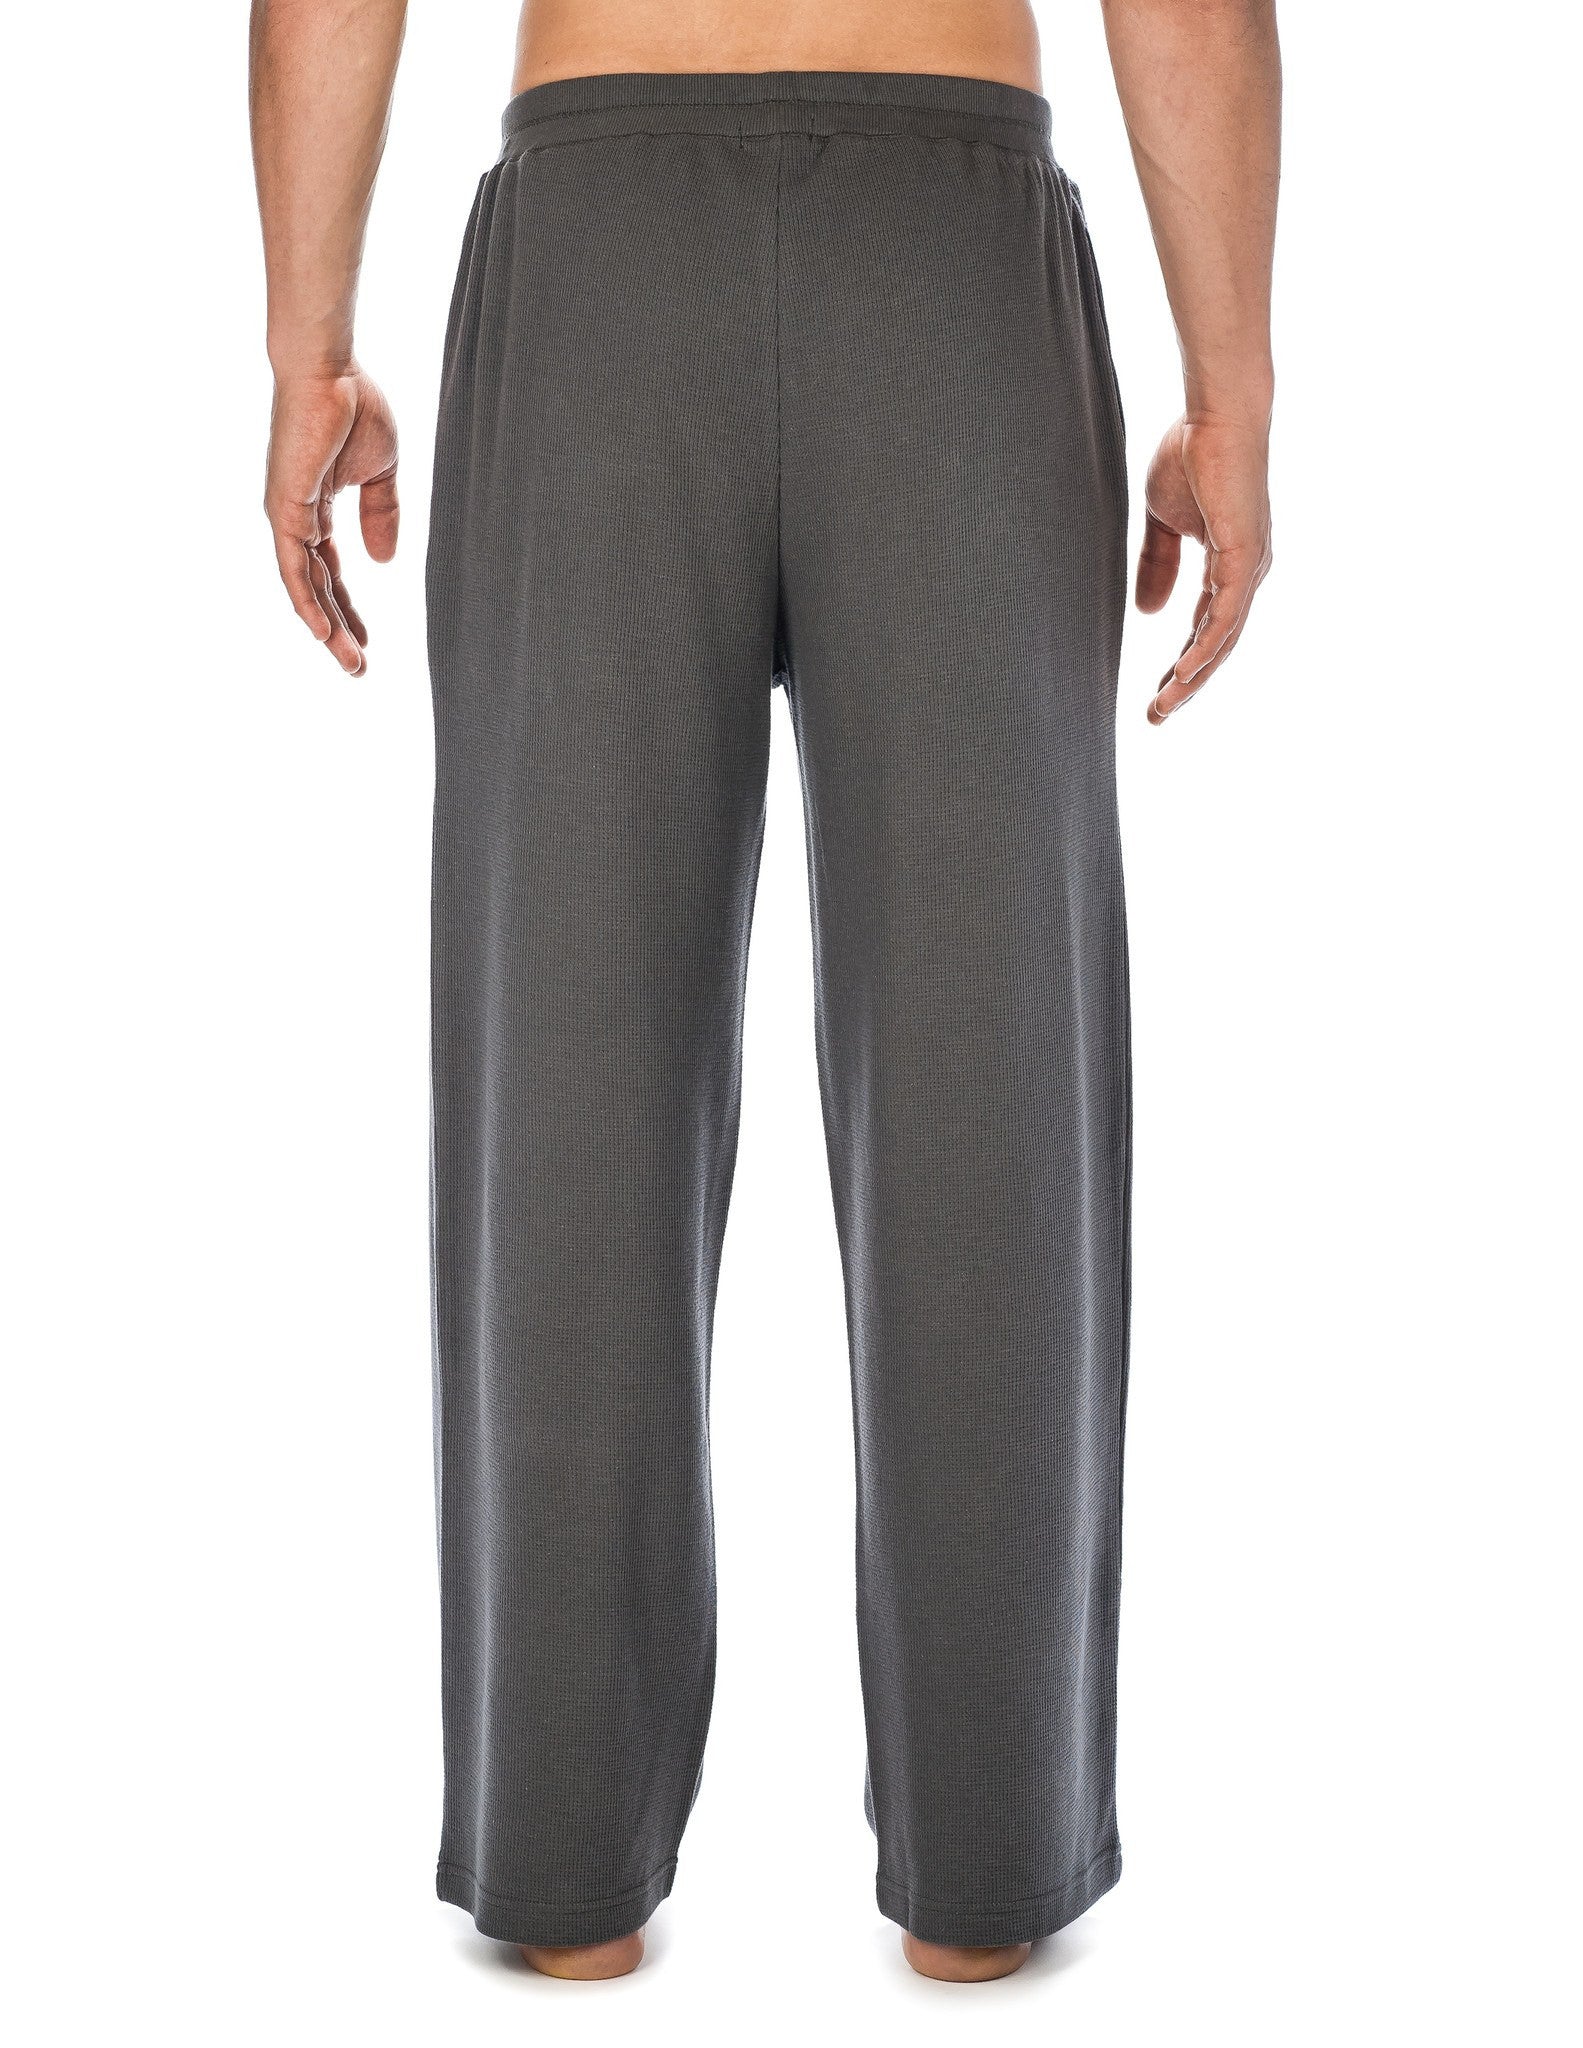 Noble Mount Men's Waffle Knit Thermal Lounge Pant